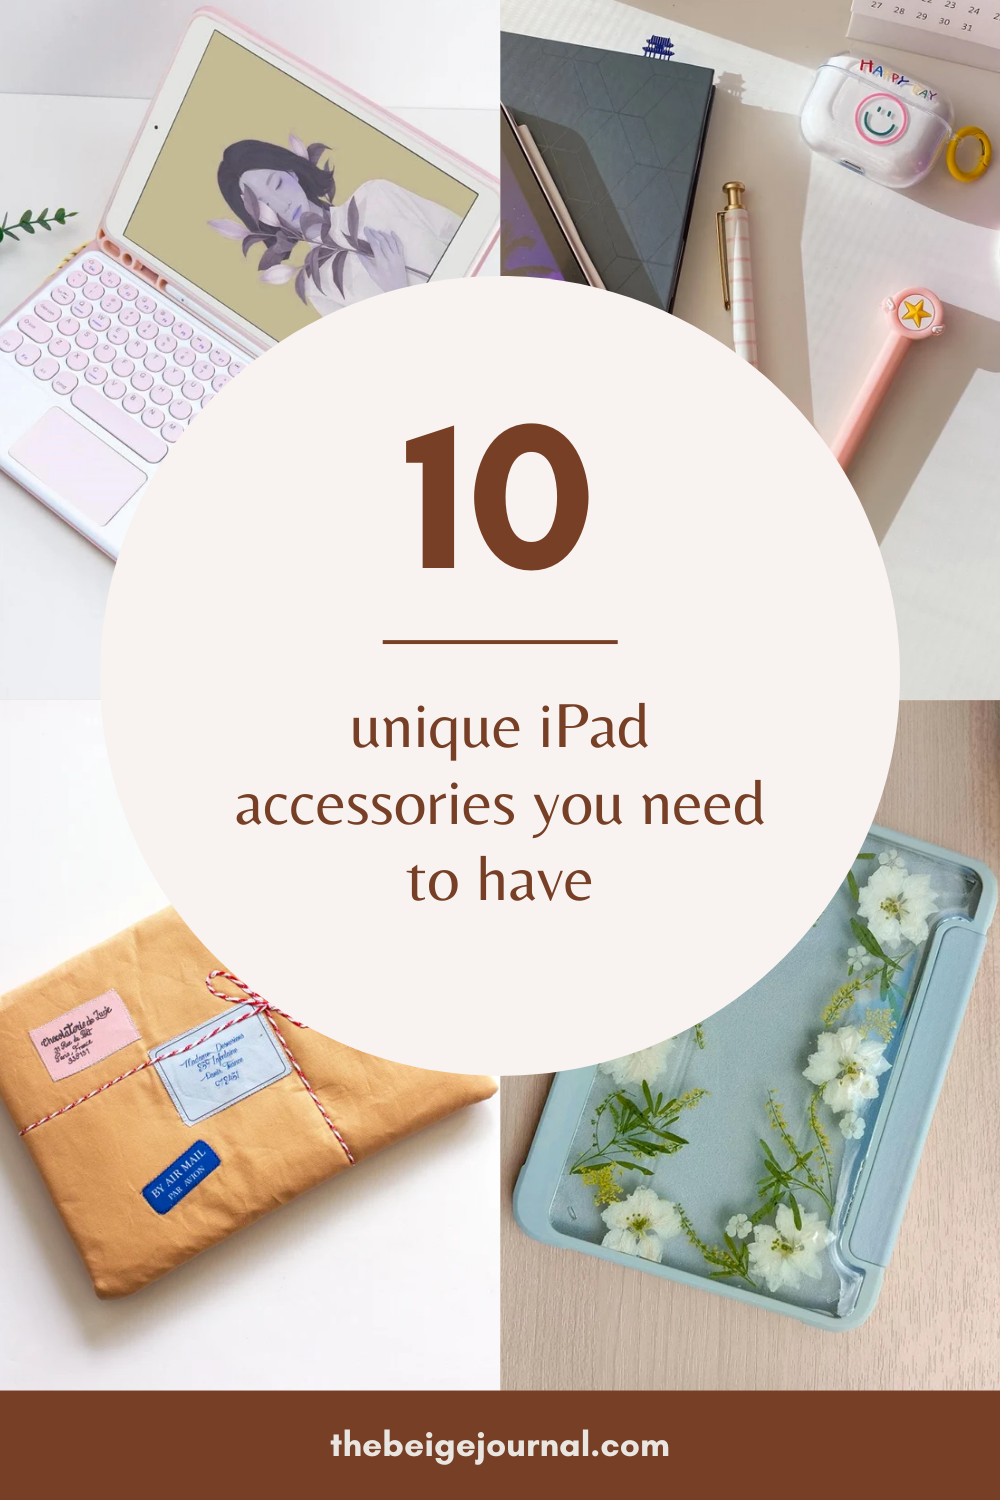 10 unique iPad accessories you need to have